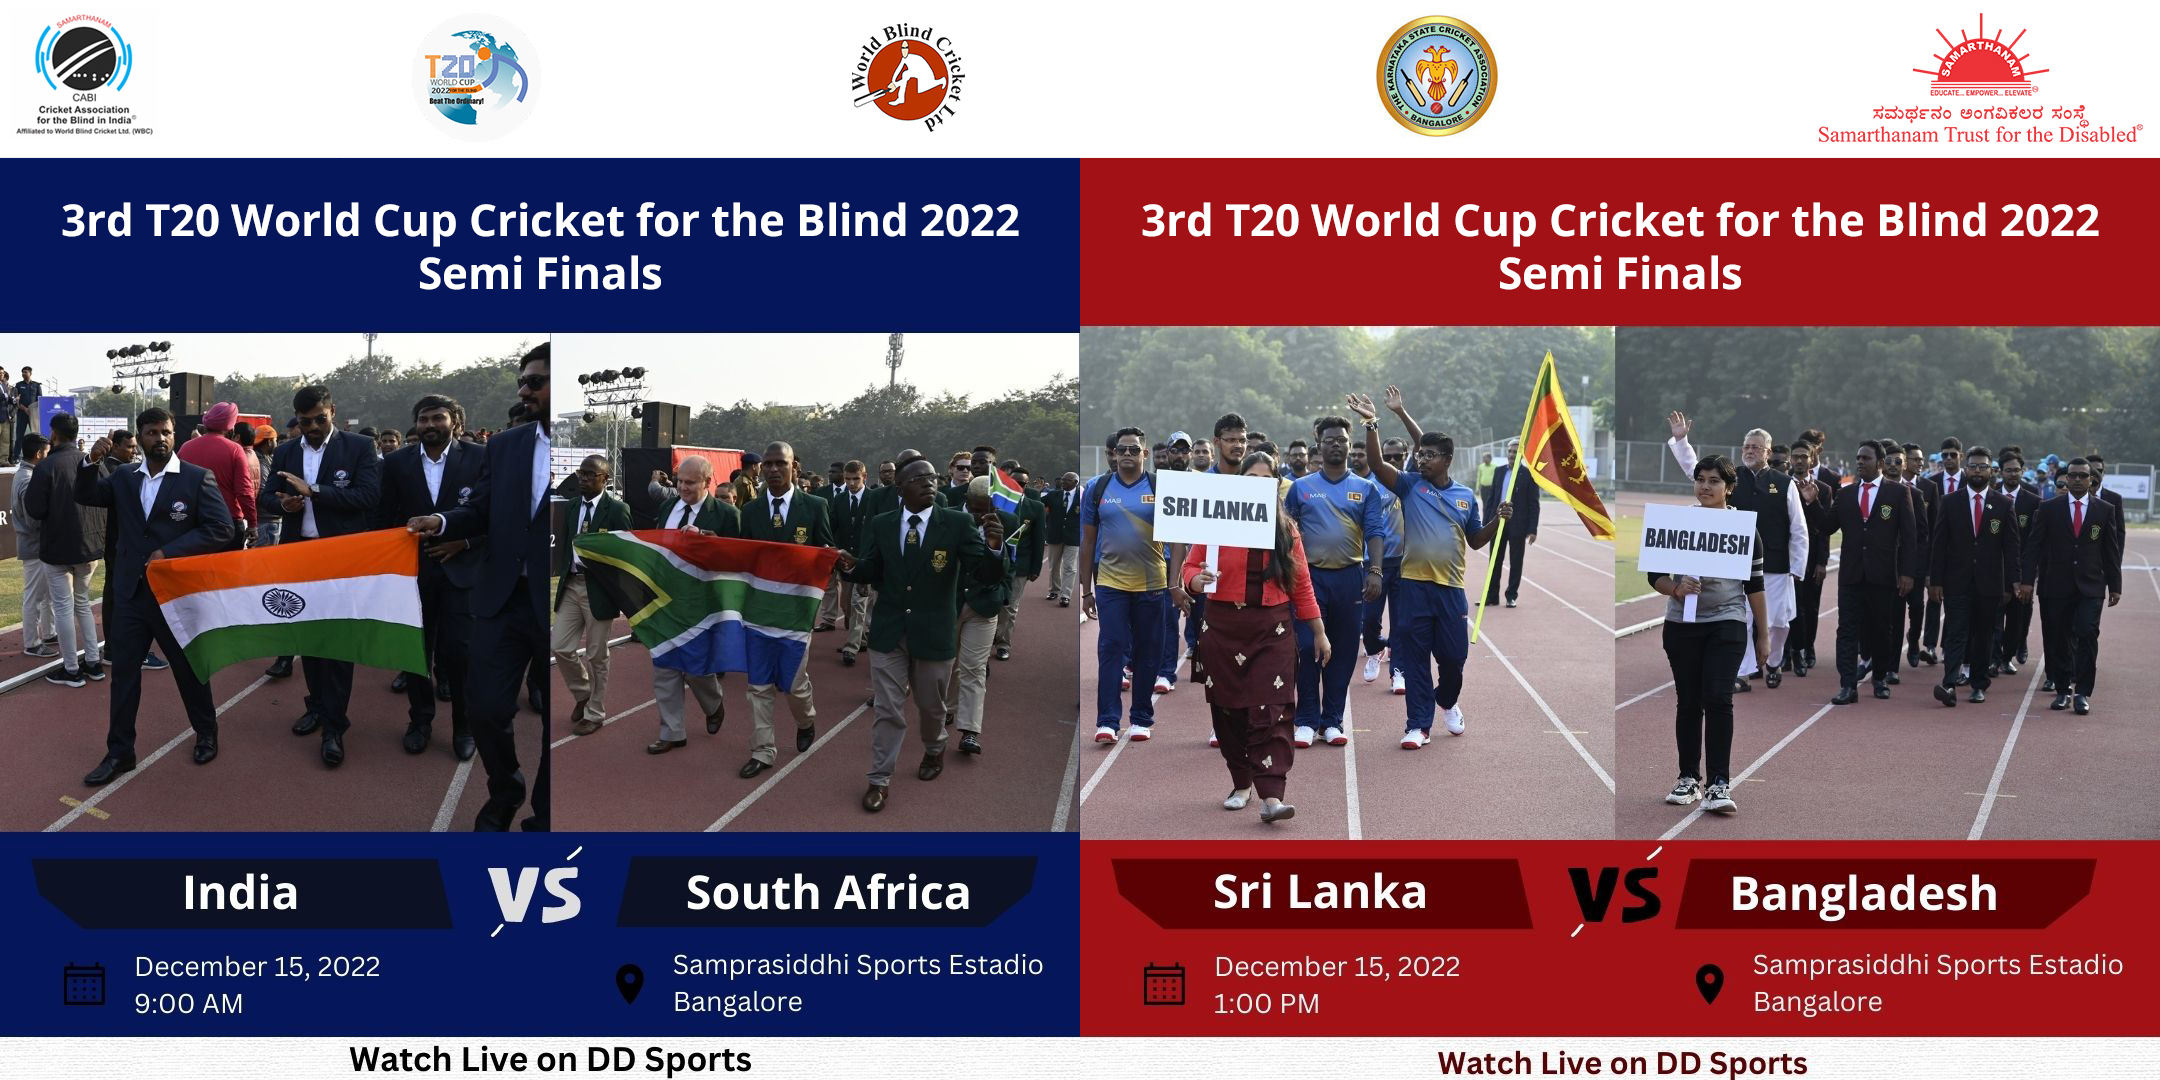 3rd T20 Cricket World Cup for the Blind 2022 Semi Finals